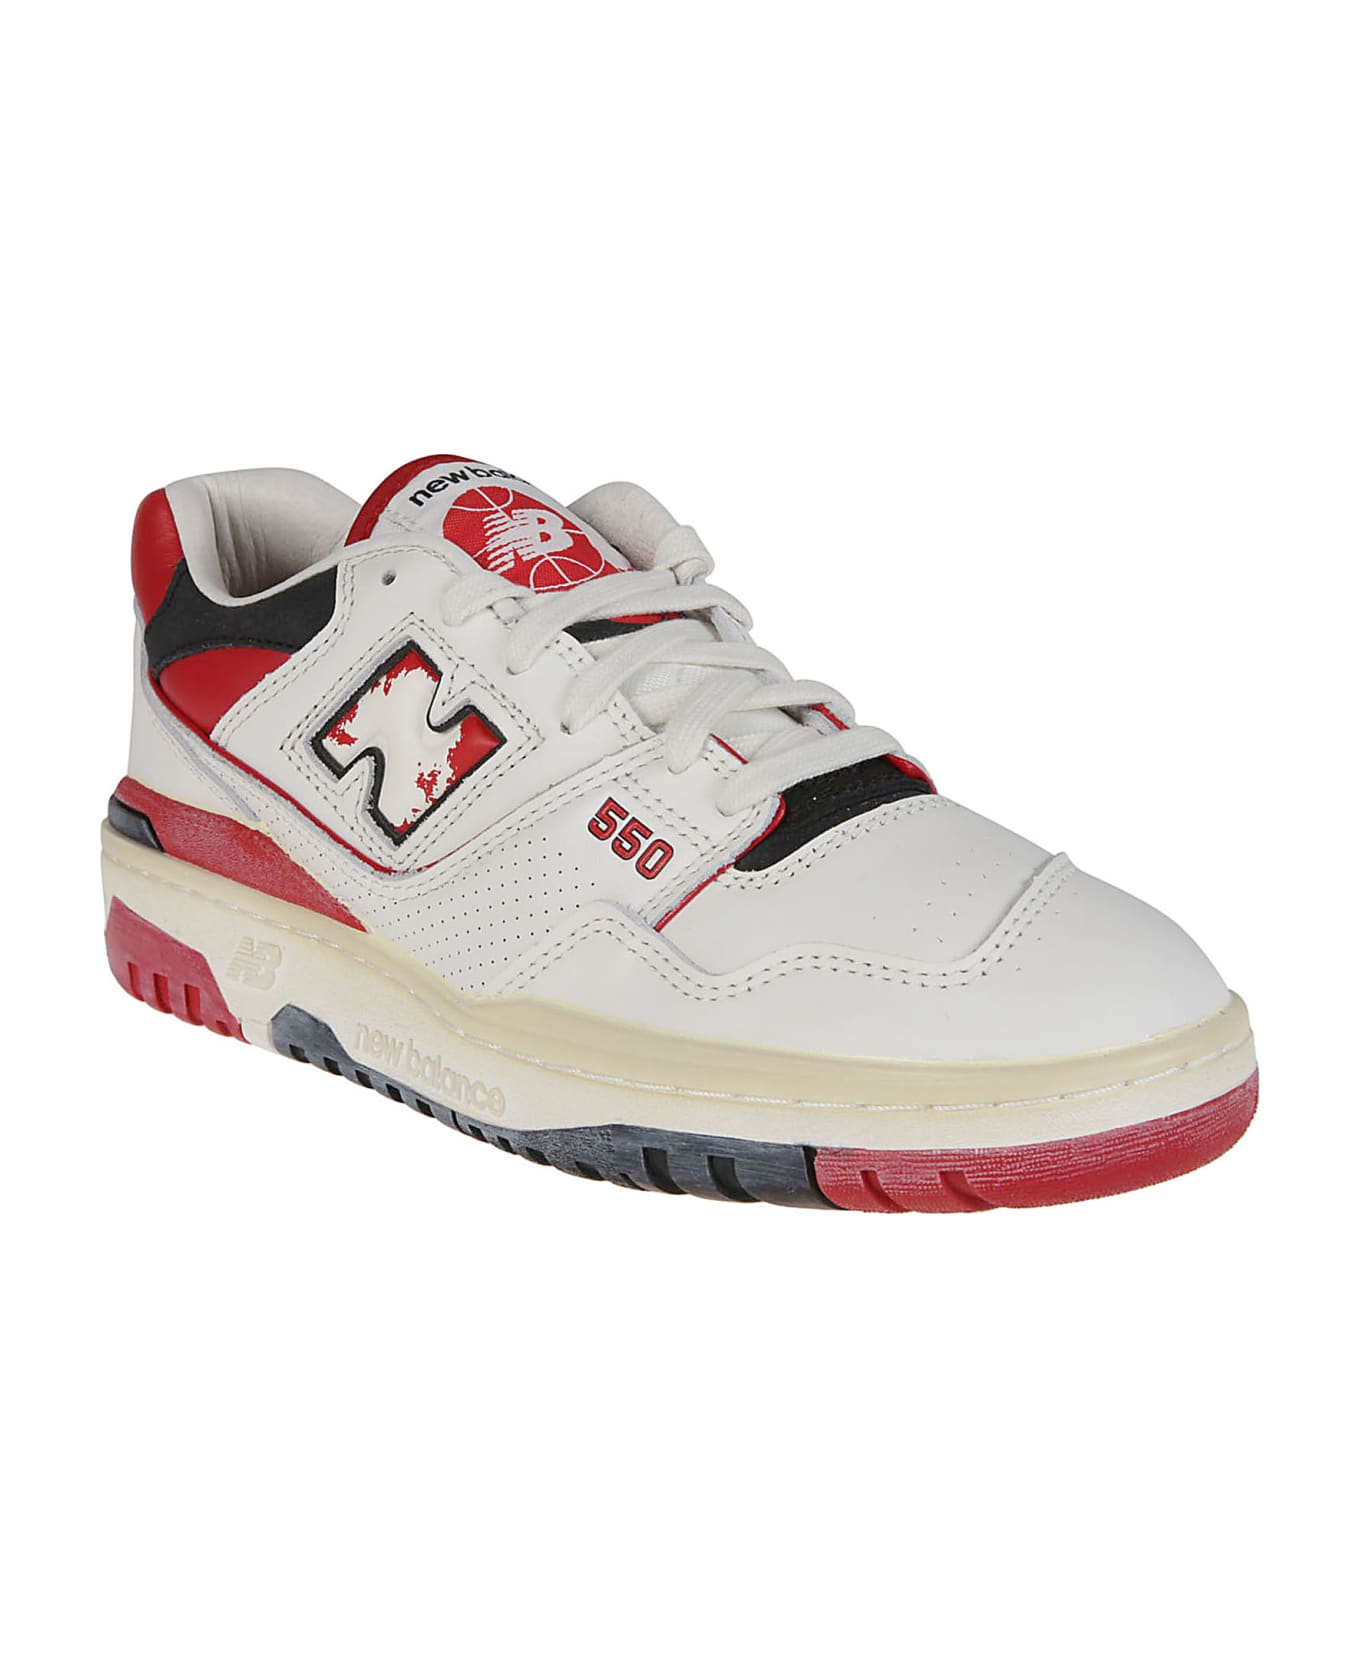 New Balance 550 Sneakers - Off White/red スニーカー